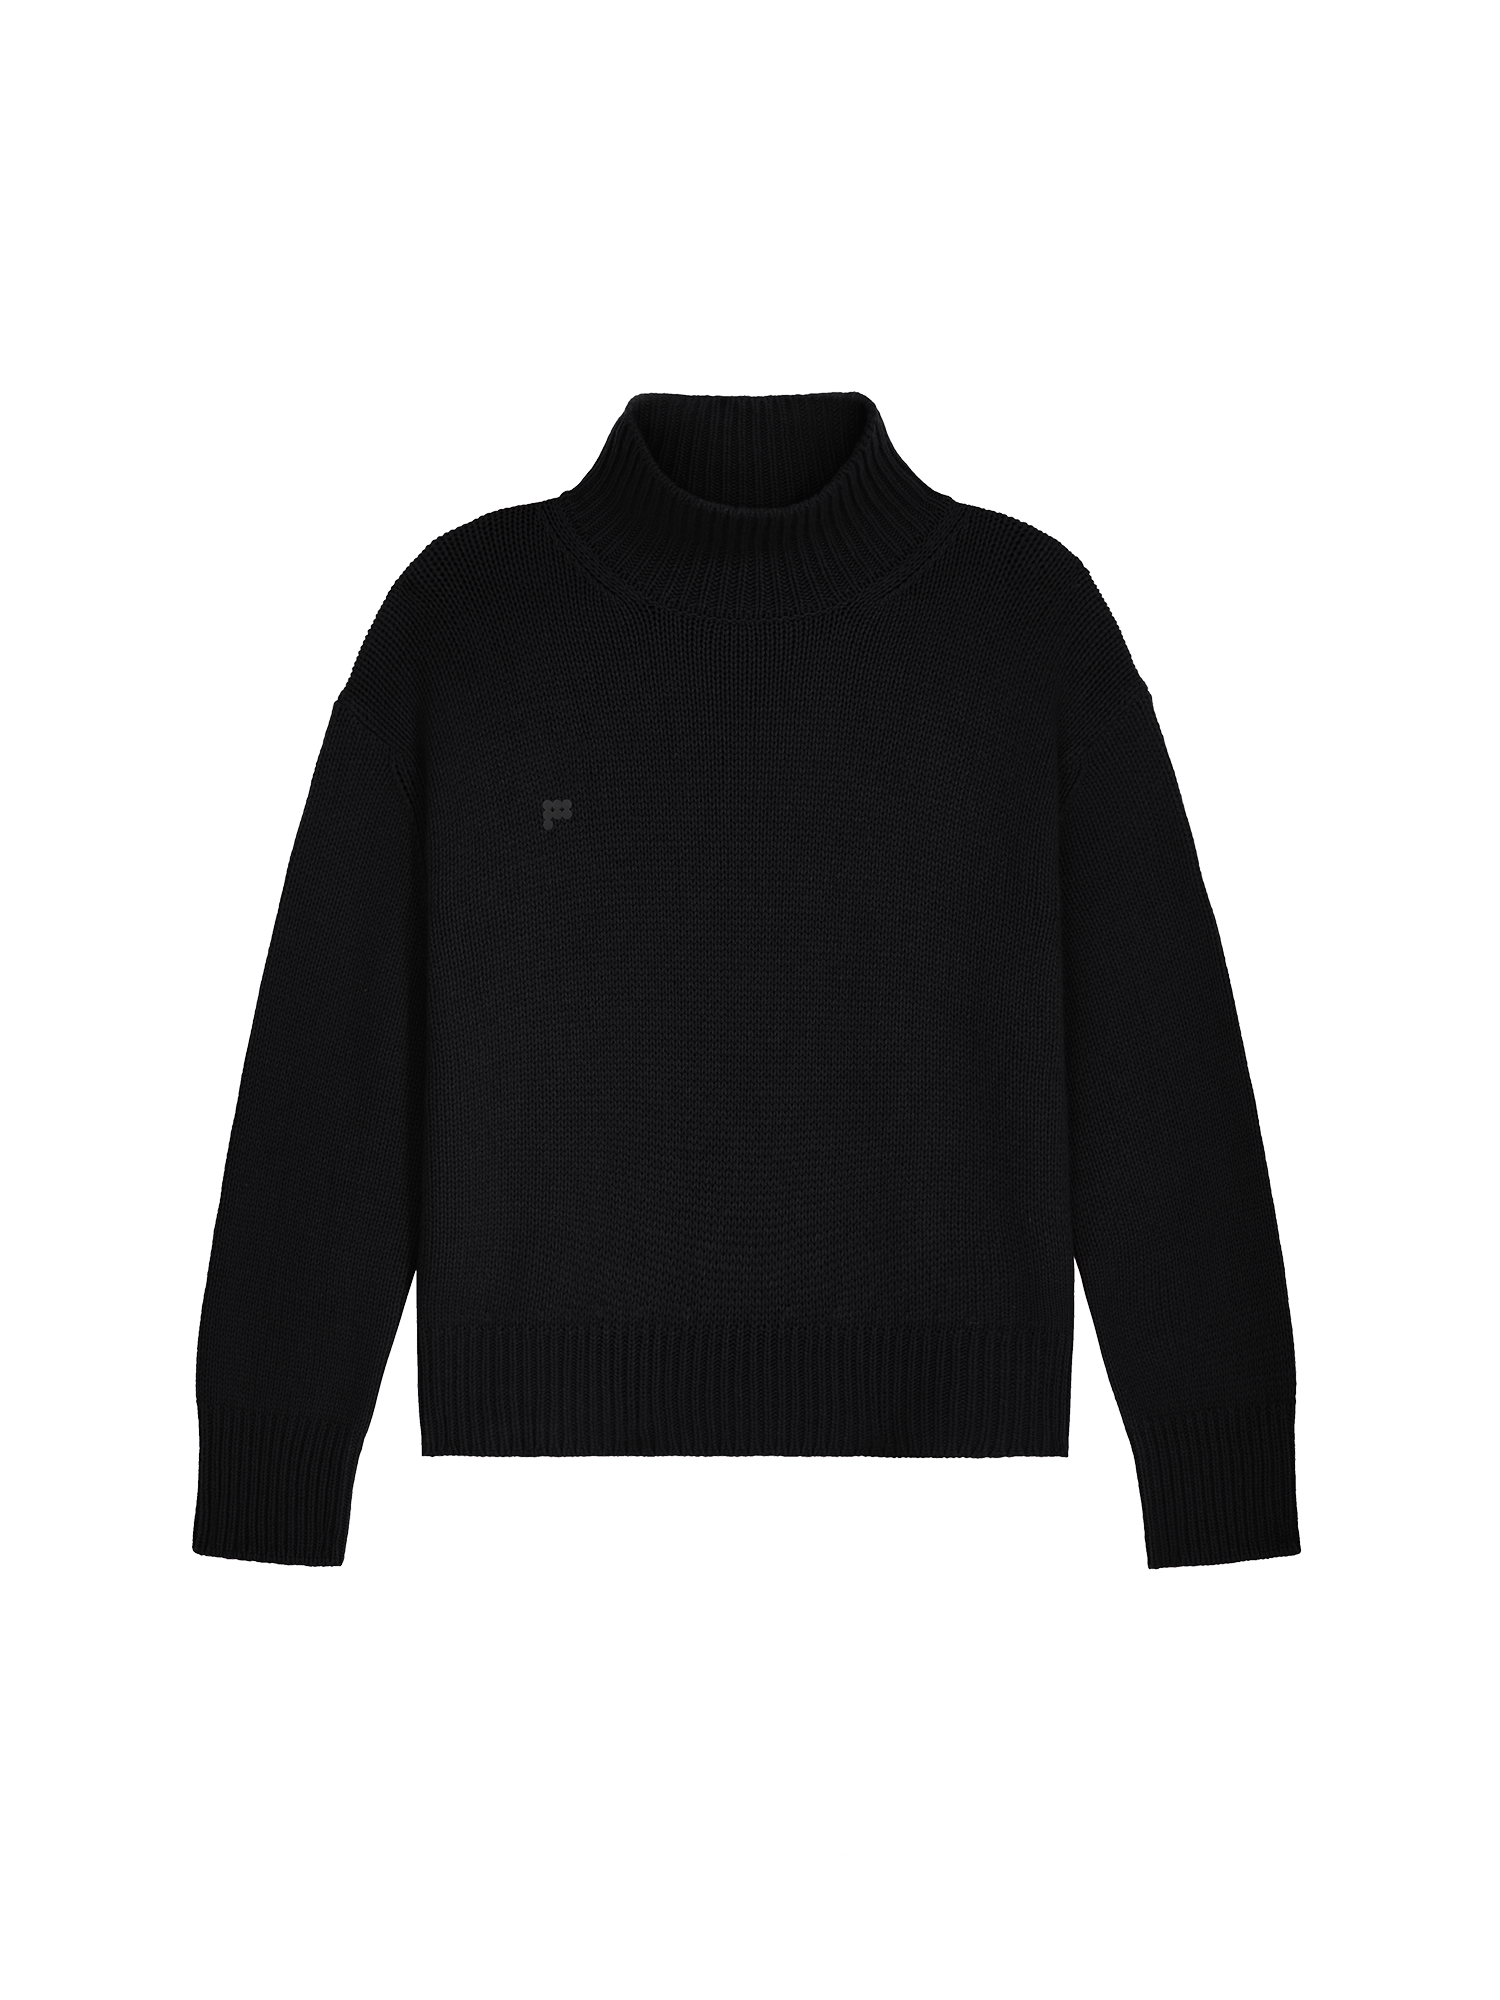 Womens_Recycled_Cashmere_Knit_-Chunky_Turtleneck_Sweater_Black-packshot-2